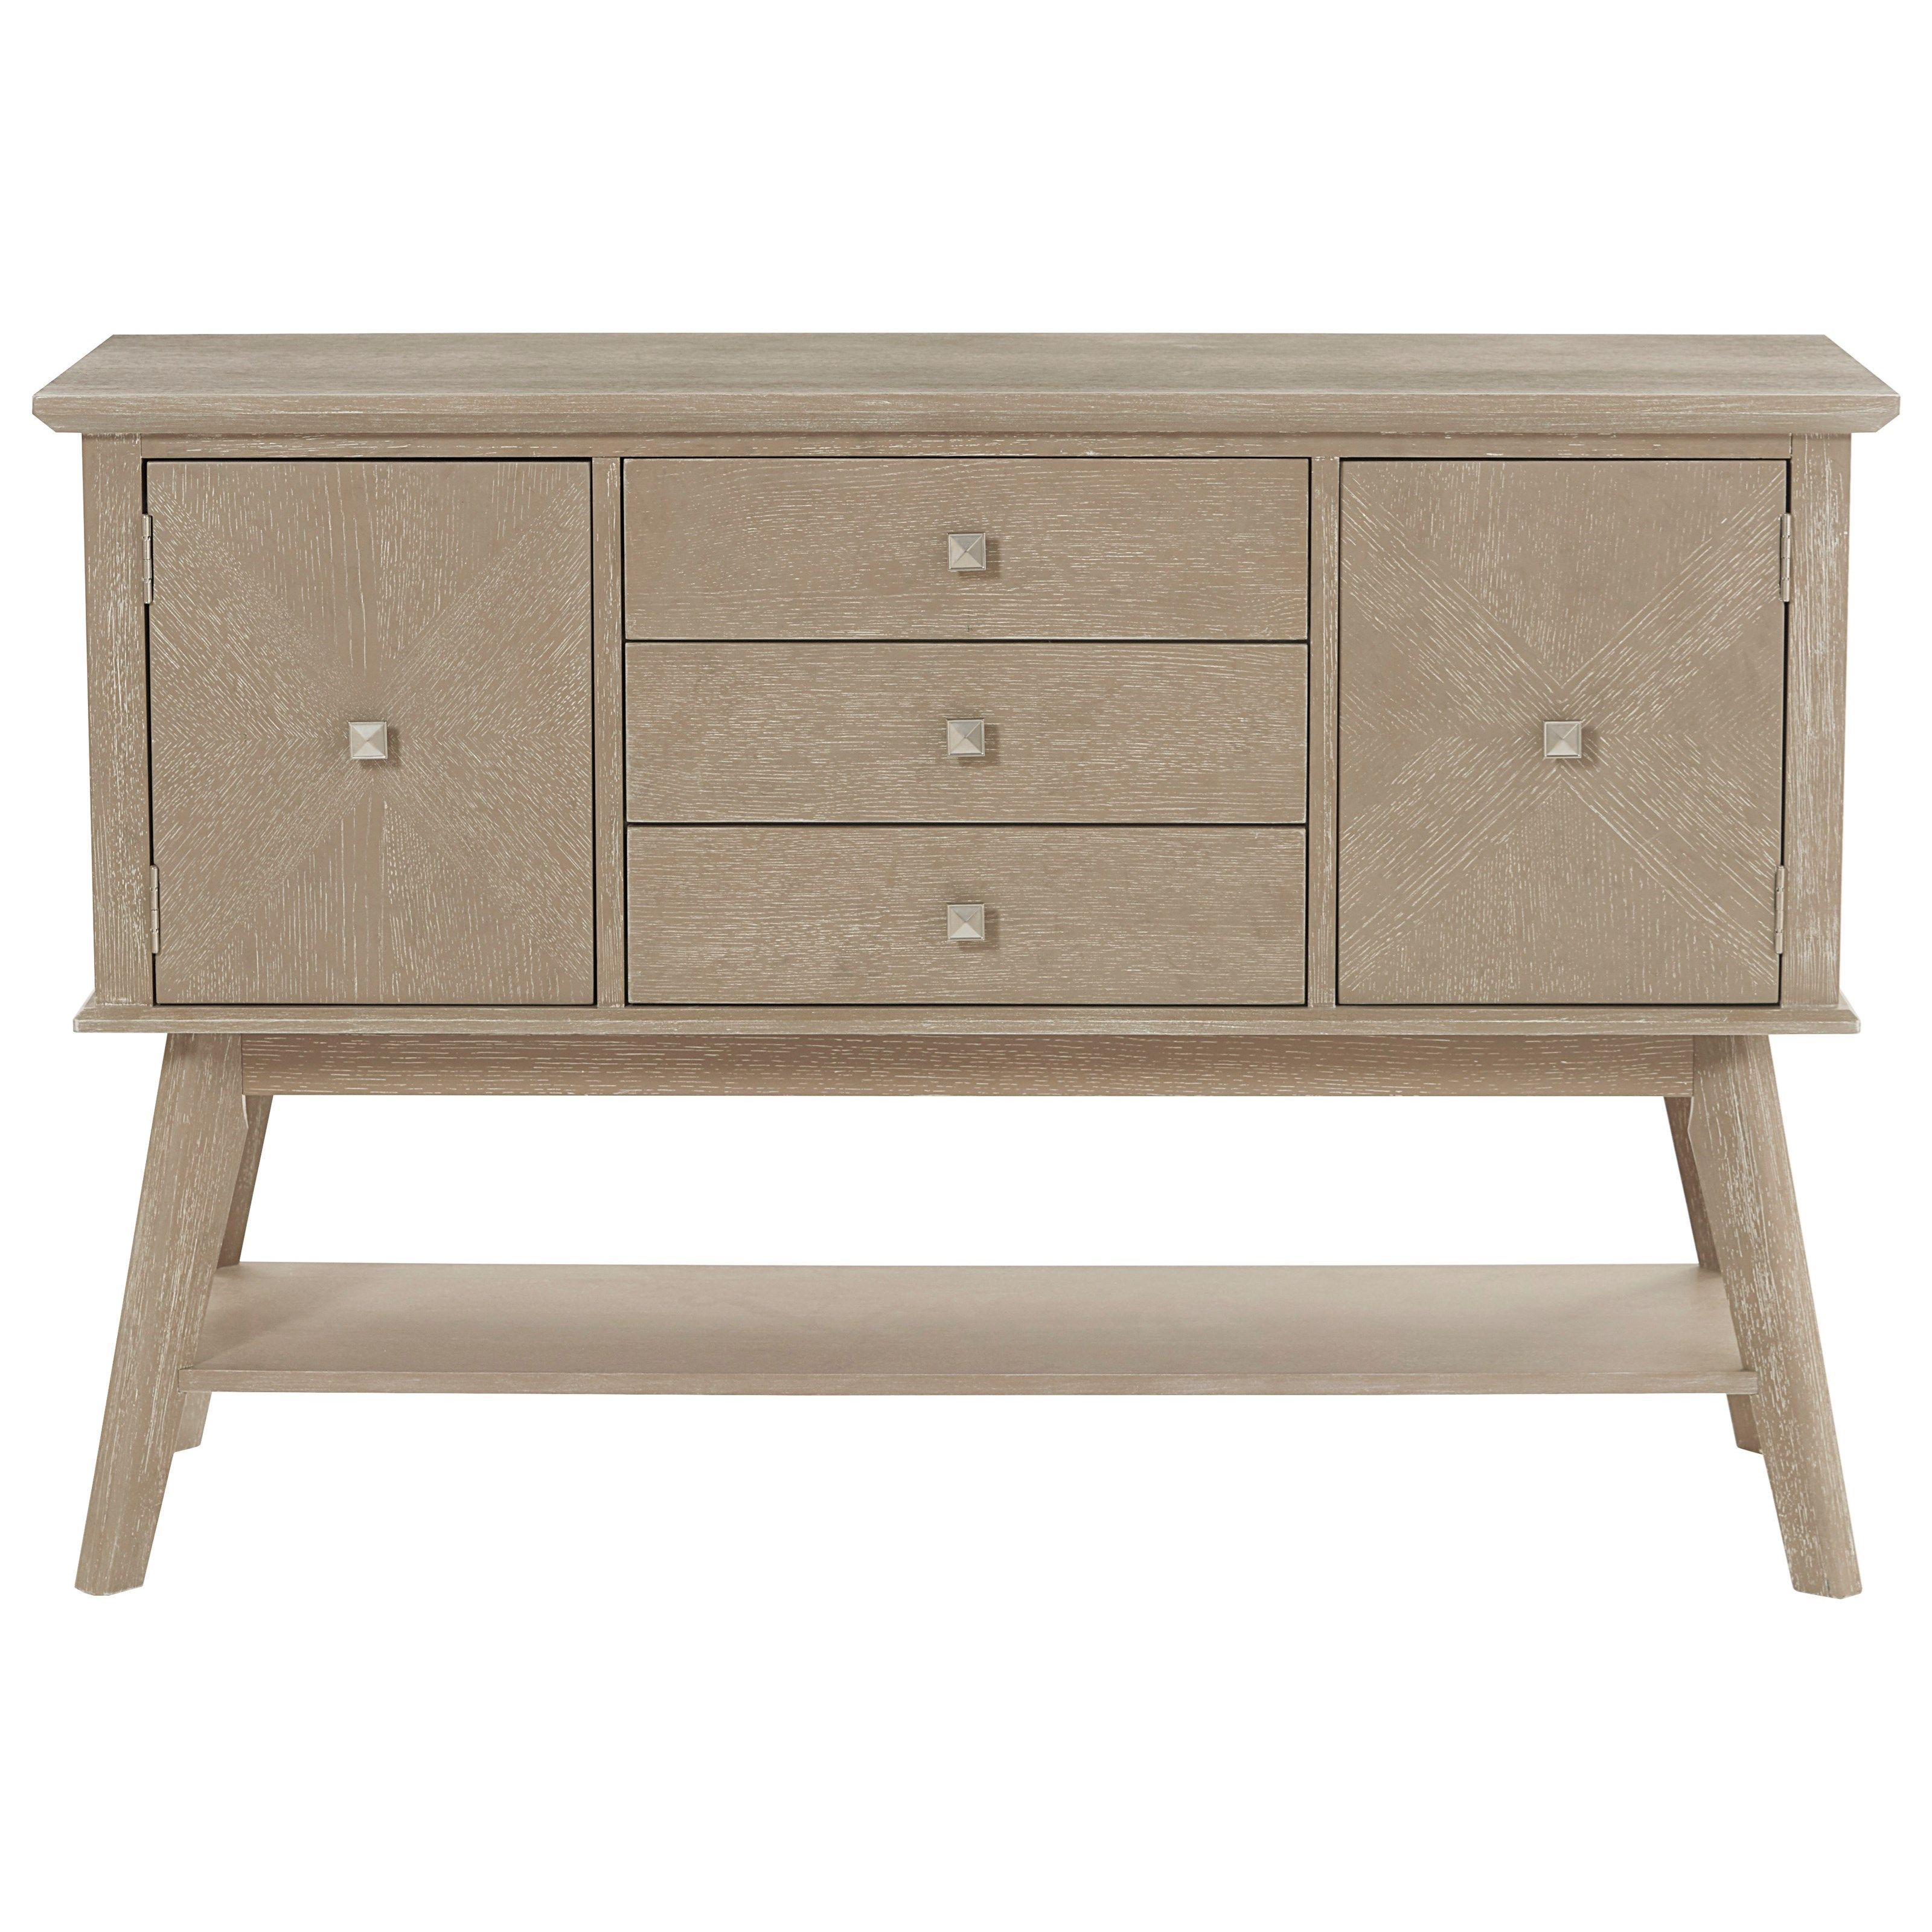 Progressive Furniture Beck D887 56 Mid Century Modern Sideboard With Usb  Ports And Outlets | Wayside Furniture & Mattress | Sideboards Regarding Sideboards With Power Outlet (View 7 of 15)